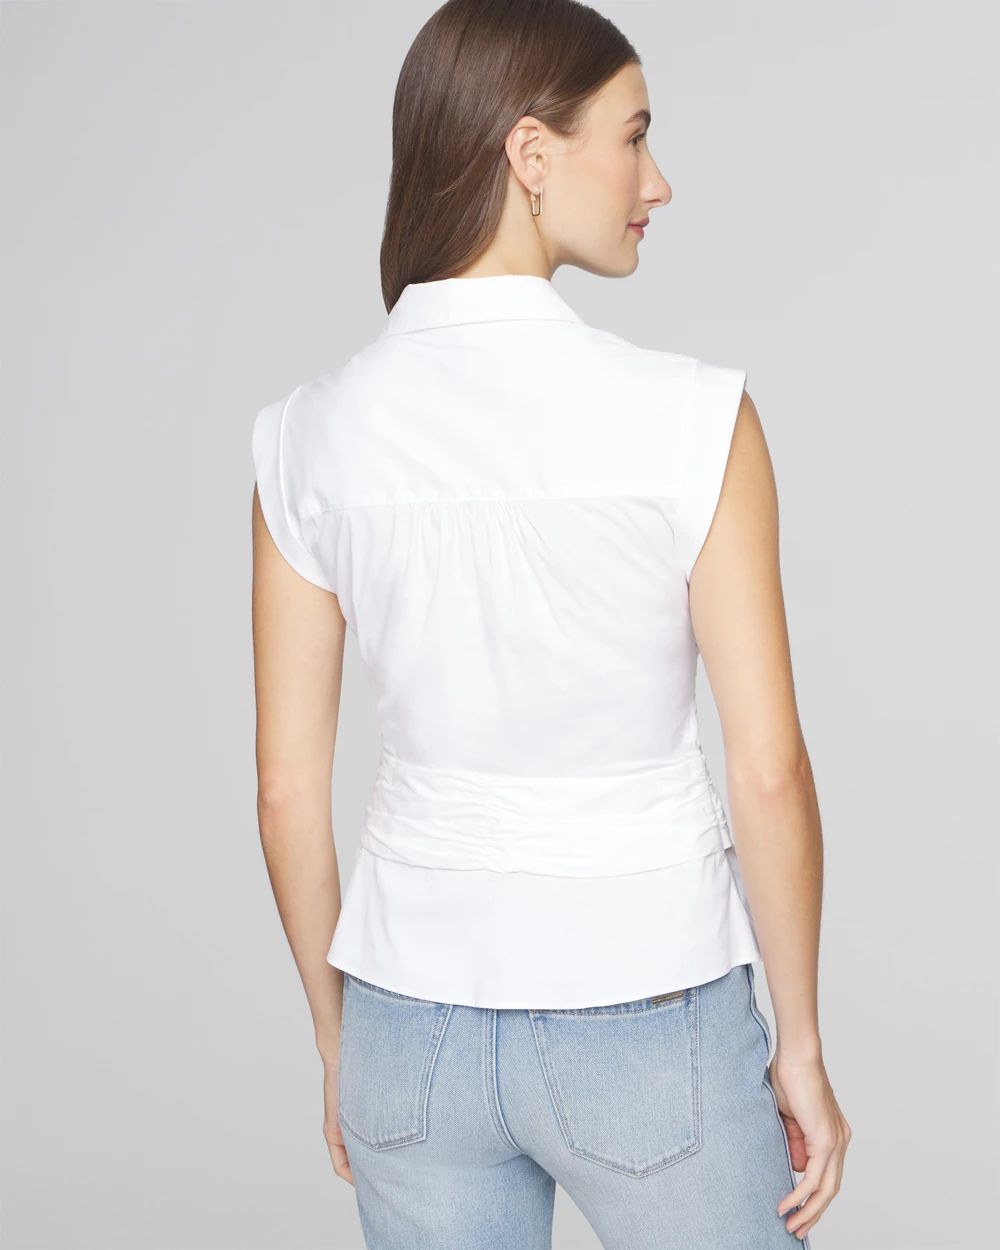 Petite Short Sleeve Crossover Poplin Top click to view larger image.